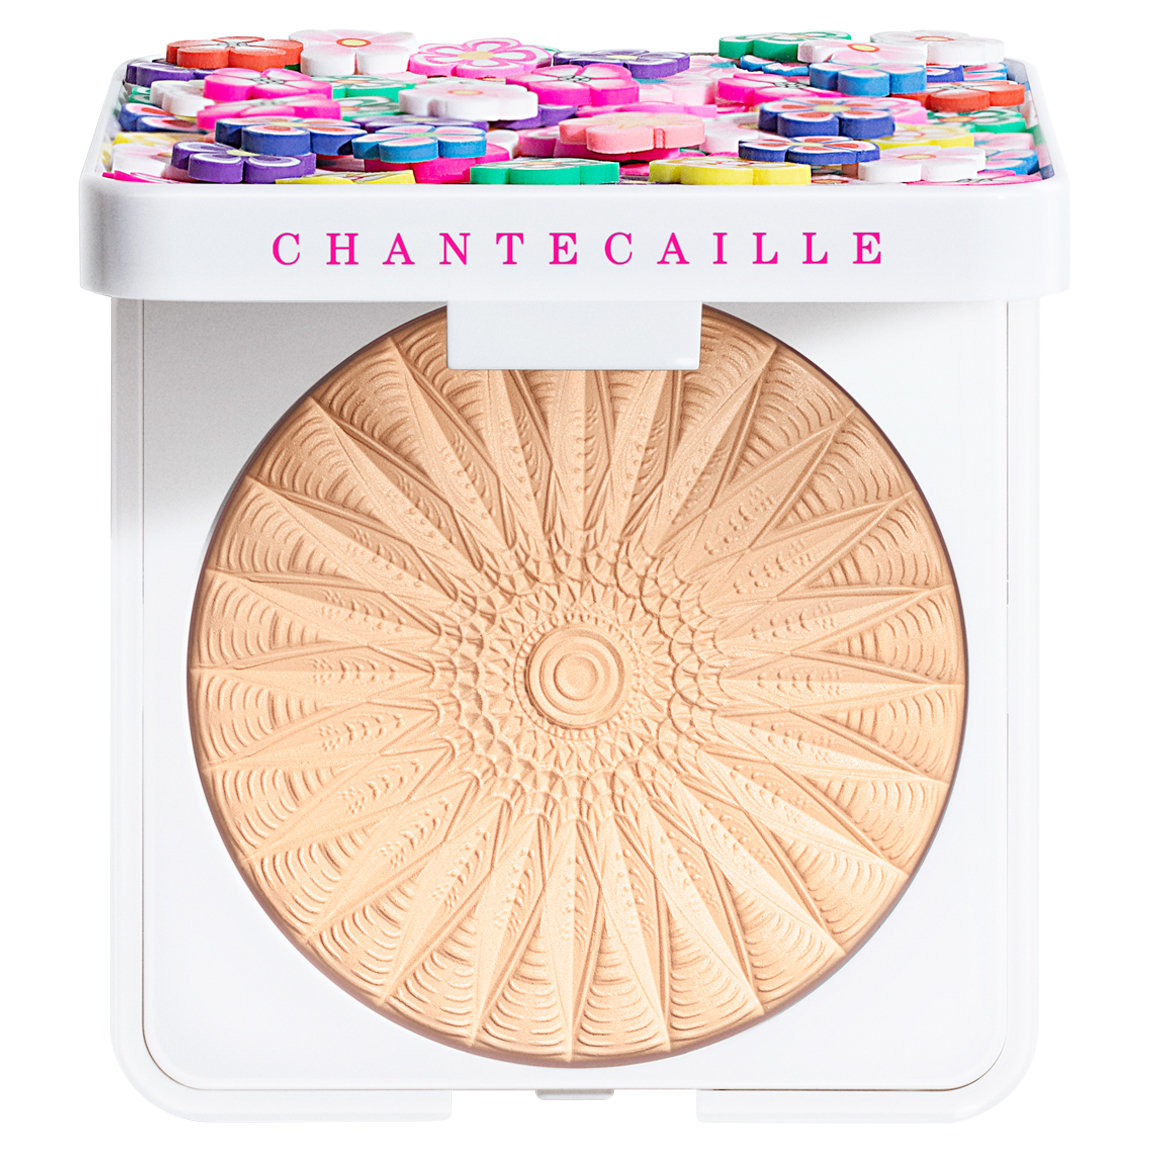 Chantecaille Limited Edition Perfect Blur Finishing Powder Light / Med  alternative view 1 - product swatch.